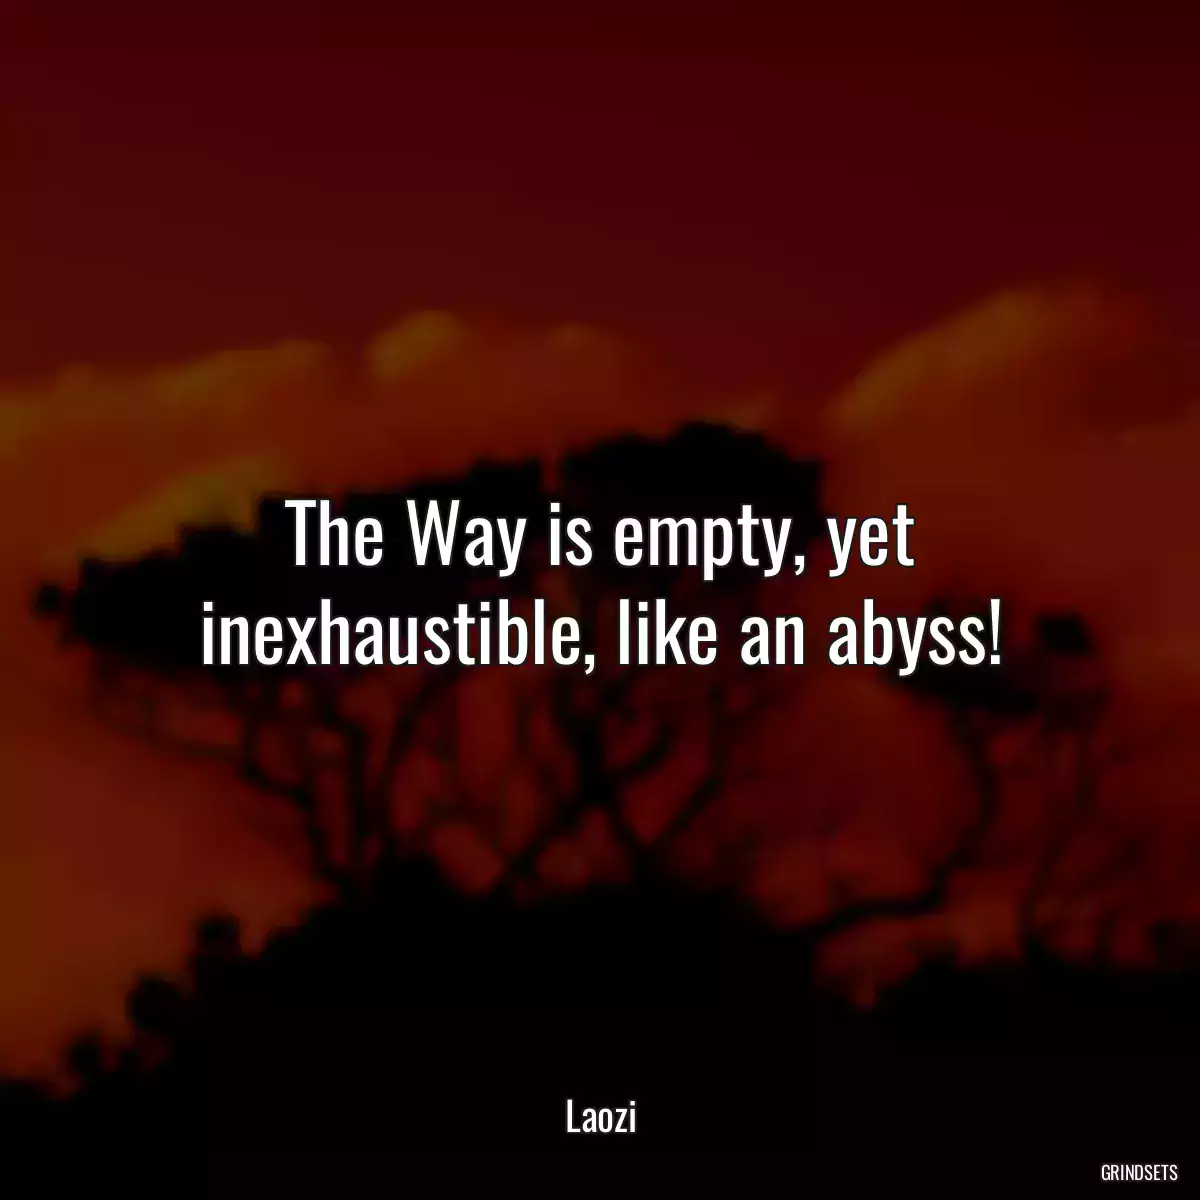 The Way is empty, yet inexhaustible, like an abyss!